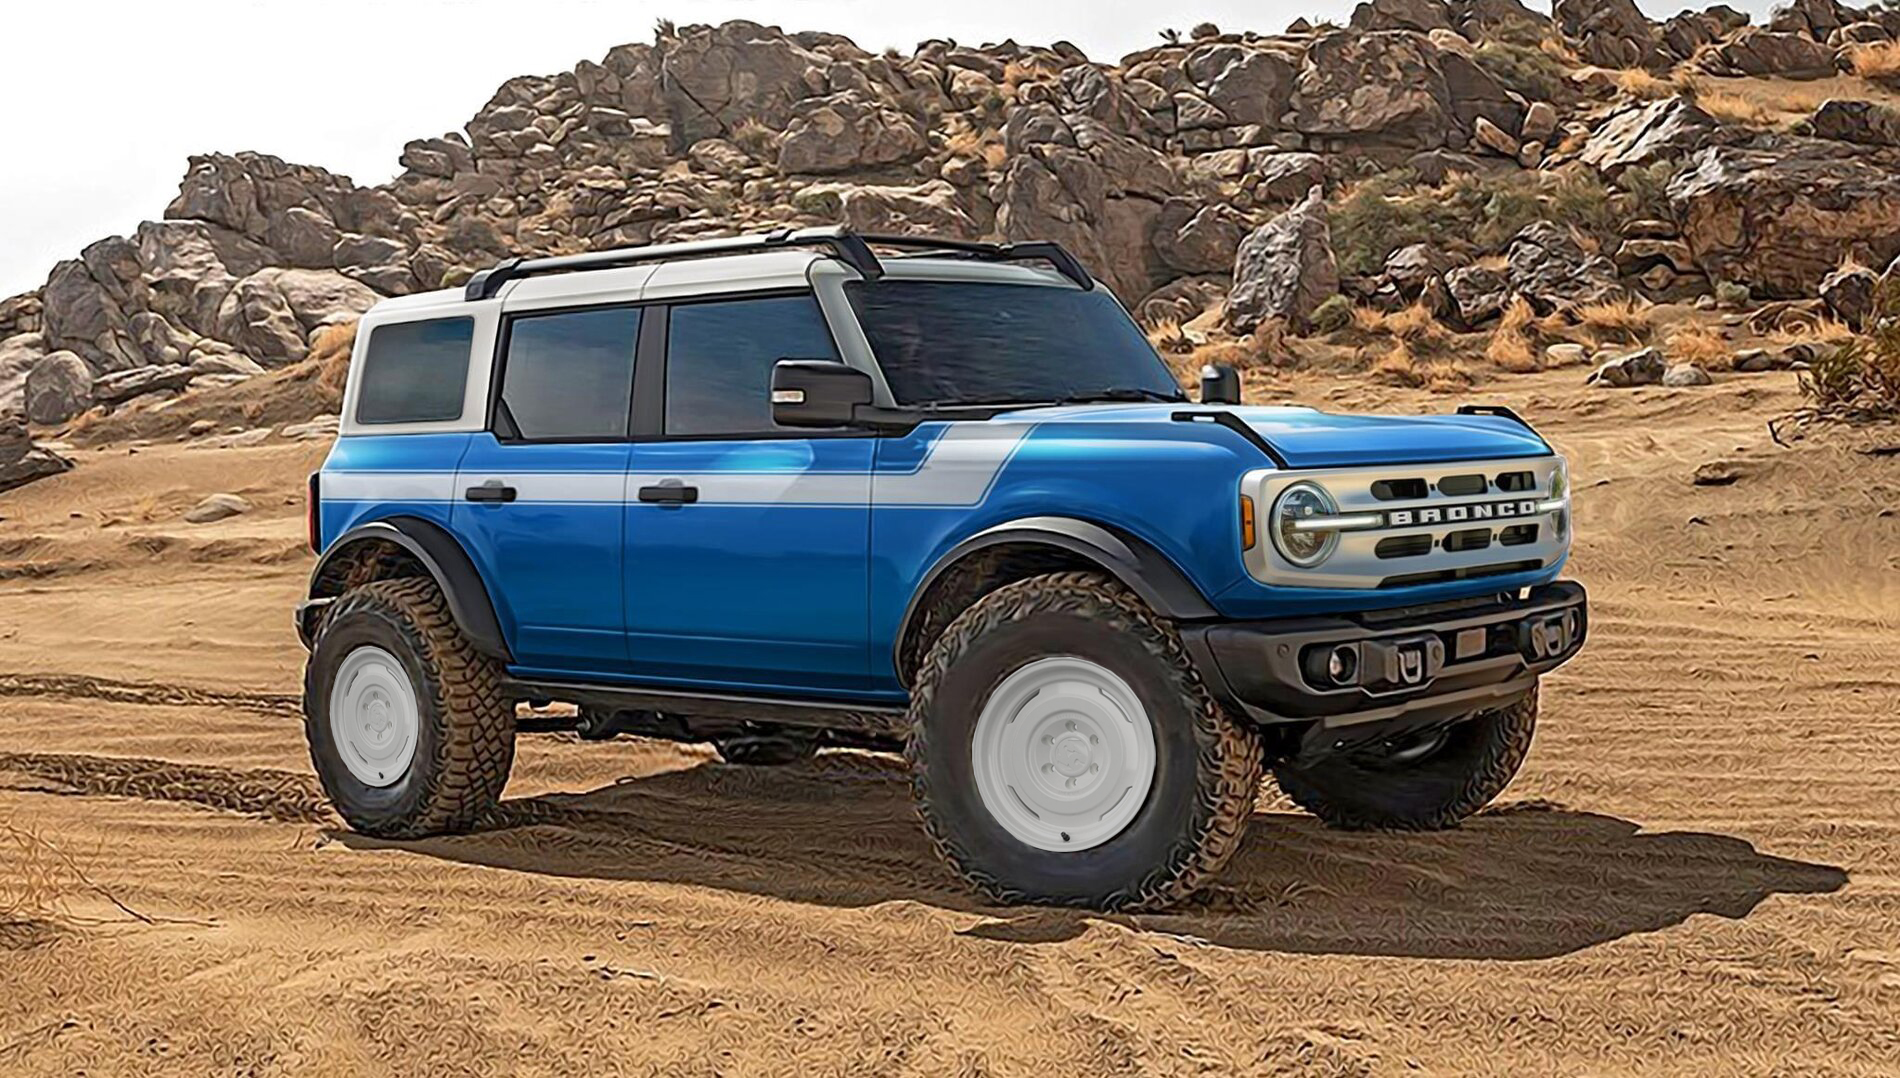 Ford Bronco Bronco Aftermarket Wheels | what options do you want? EC4D8C26-A9DD-4E22-A82F-B06E576DE42E copy